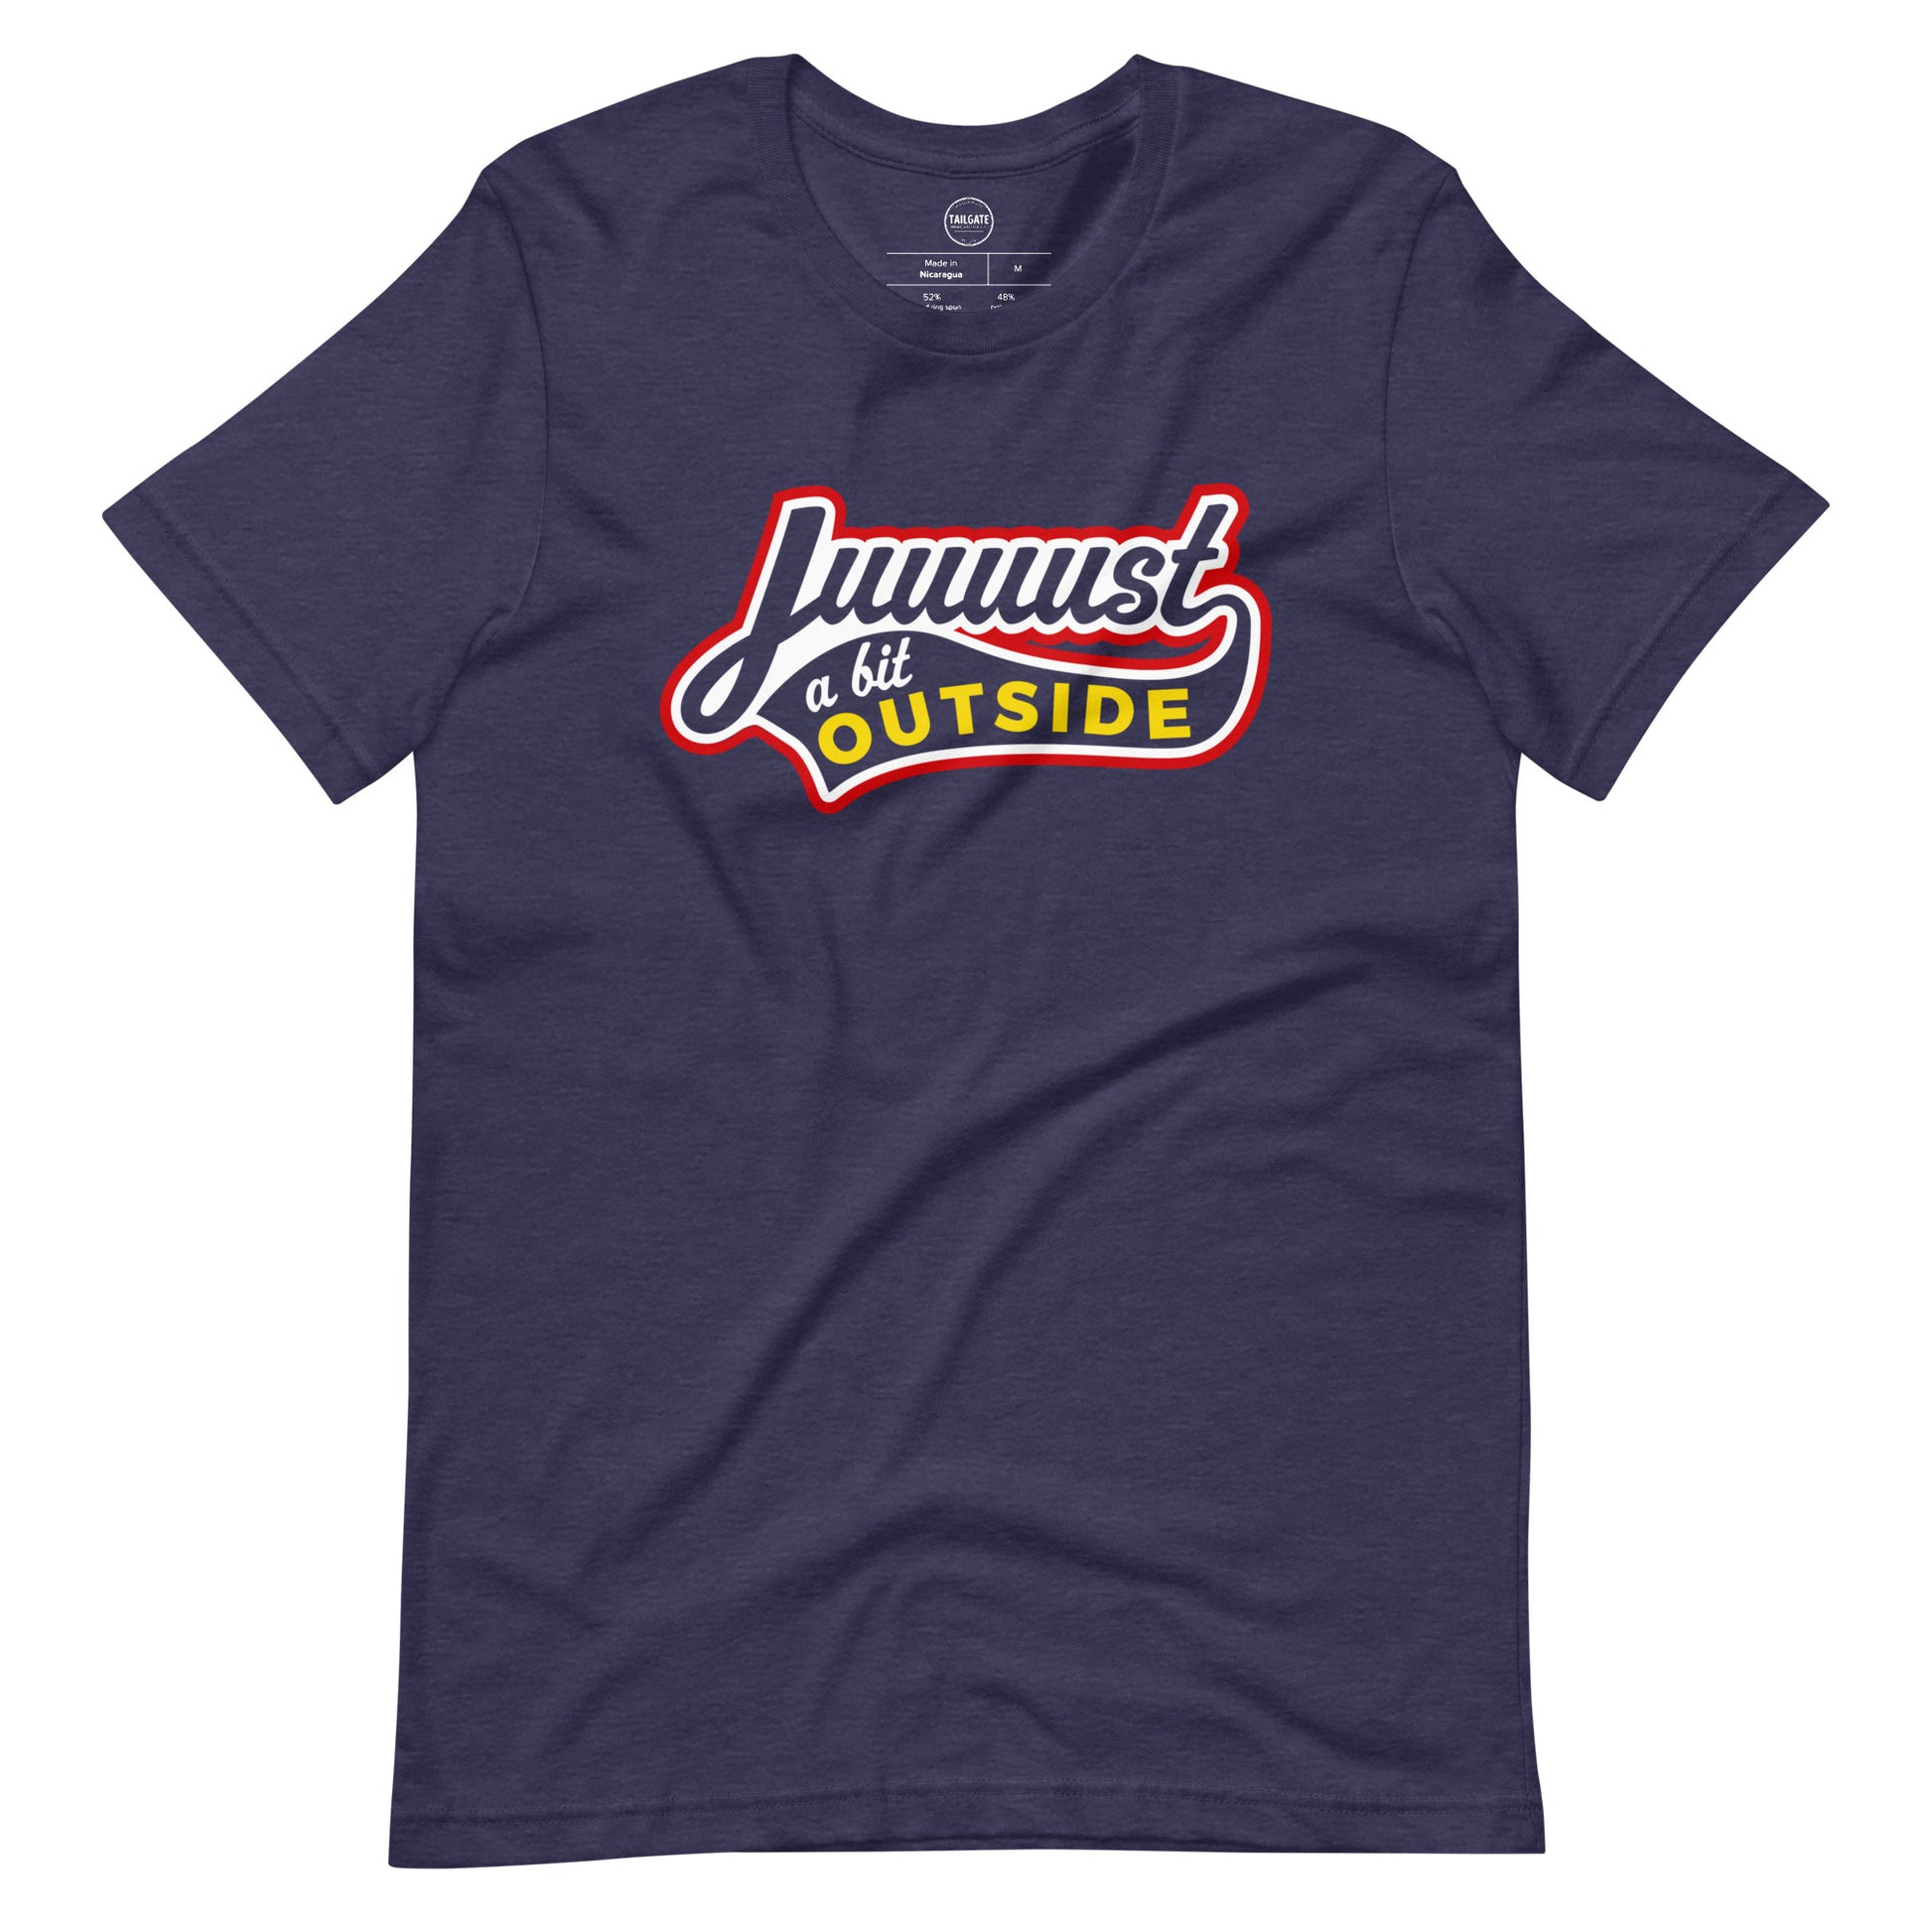 Image of heather navy t-shirt with design of "Juuuust a bit Outside" in white/red/yellow located on centre chest. Just a Bit Outside is an homage to the great baseball movie "Major League". This design is exclusive to Tailgate Mercantile and available only online.